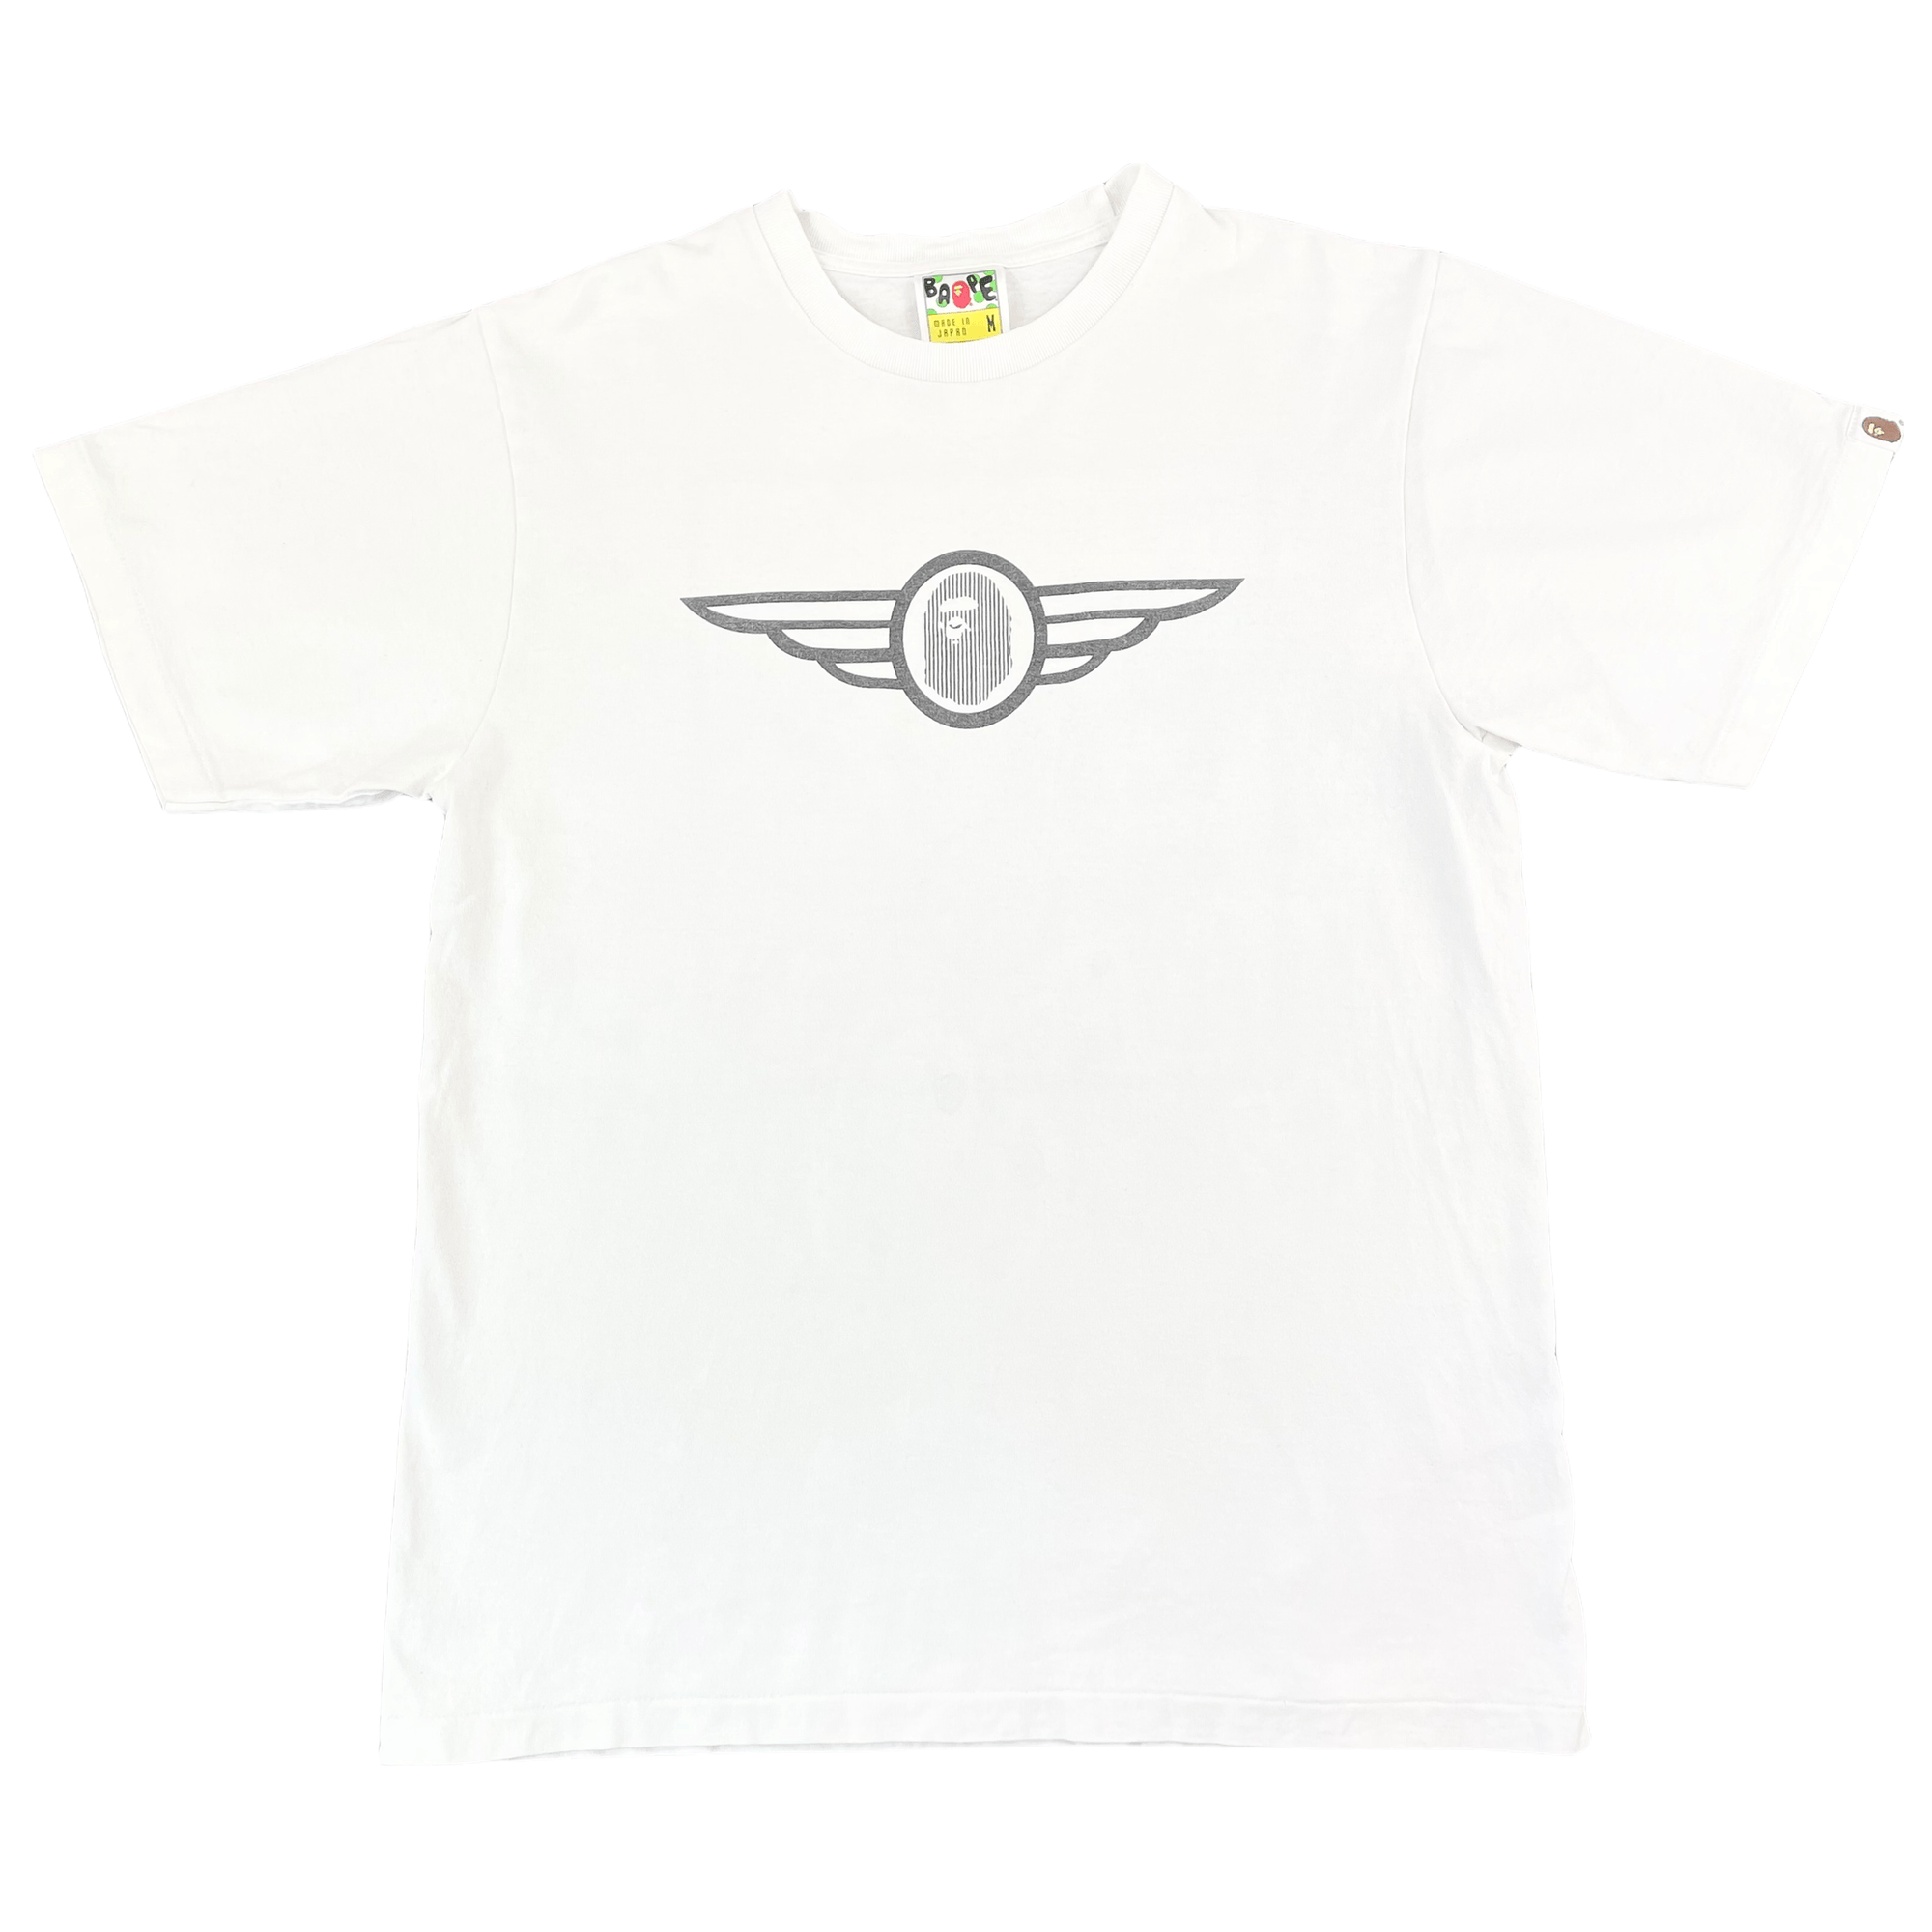 Bape plane logo t shirt size M Marks on front  White Pre loved second hand - second wave vintage store